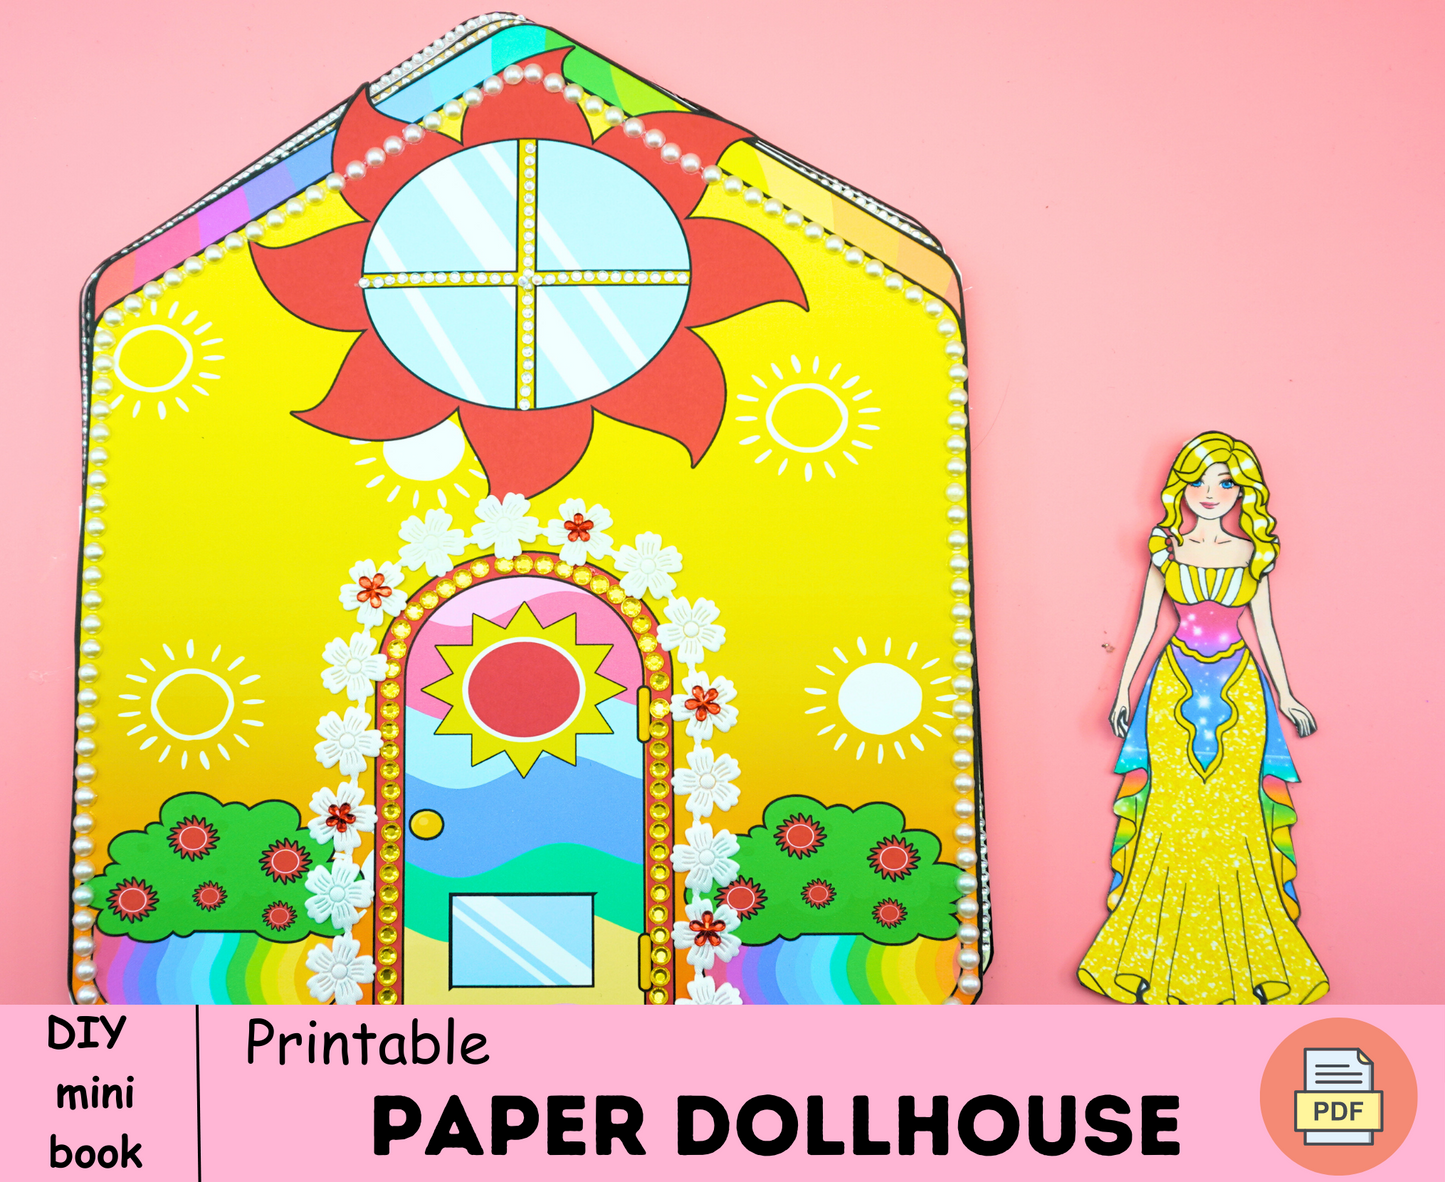 Barbie's sun house printables ☀️ DIY kit for your little one - Paper doll house - Activity book for kids ☀️ Woa Doll Crafts